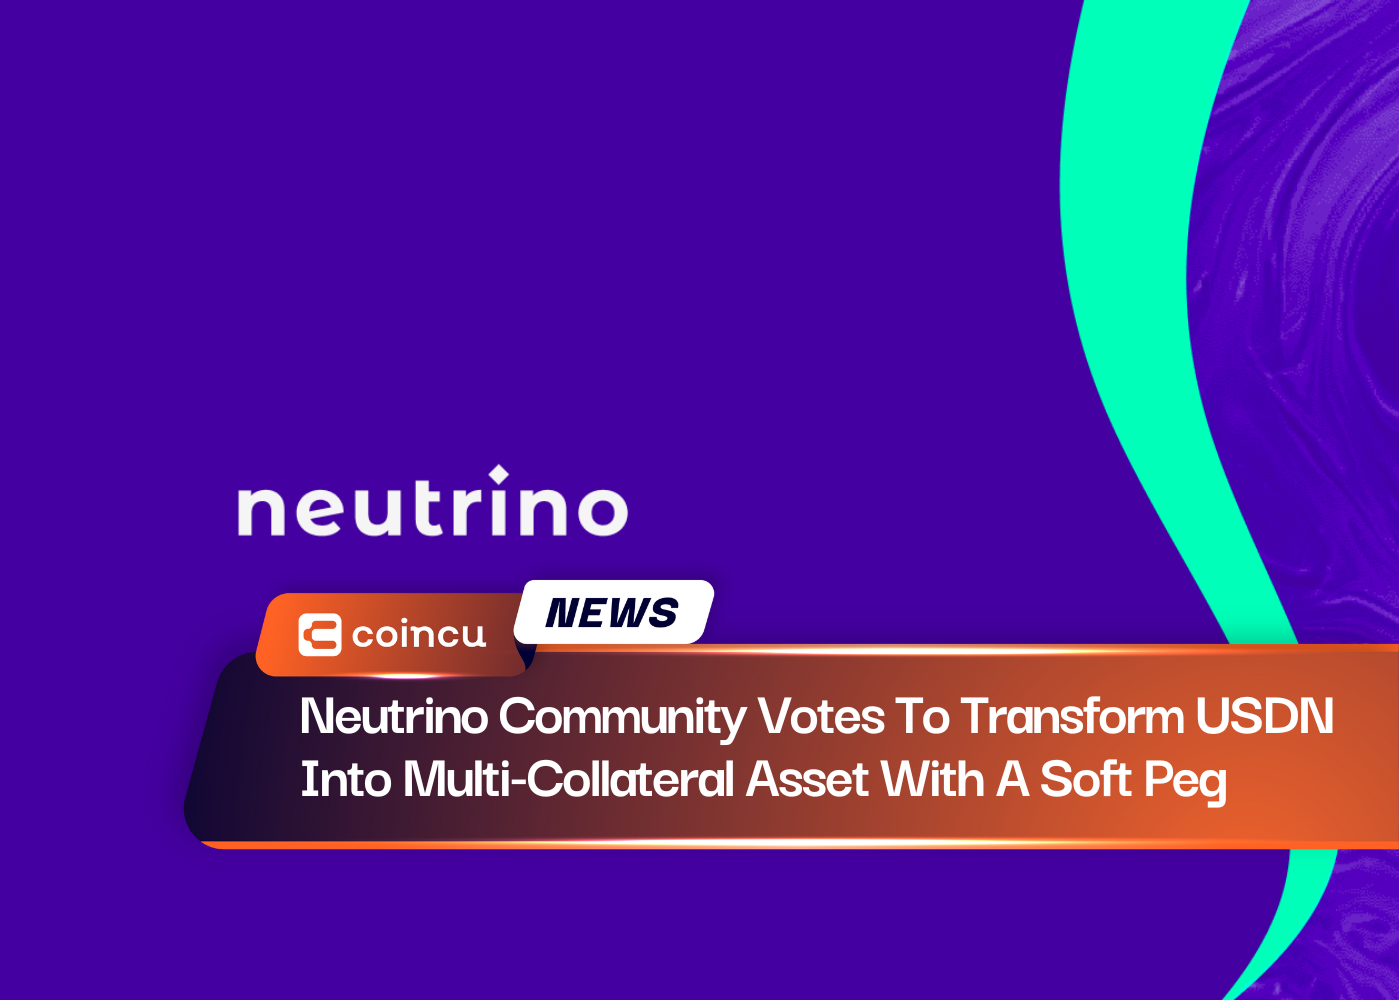 Neutrino Community Votes To Transform USDN Into Multi-Collateral Asset With A Soft Peg